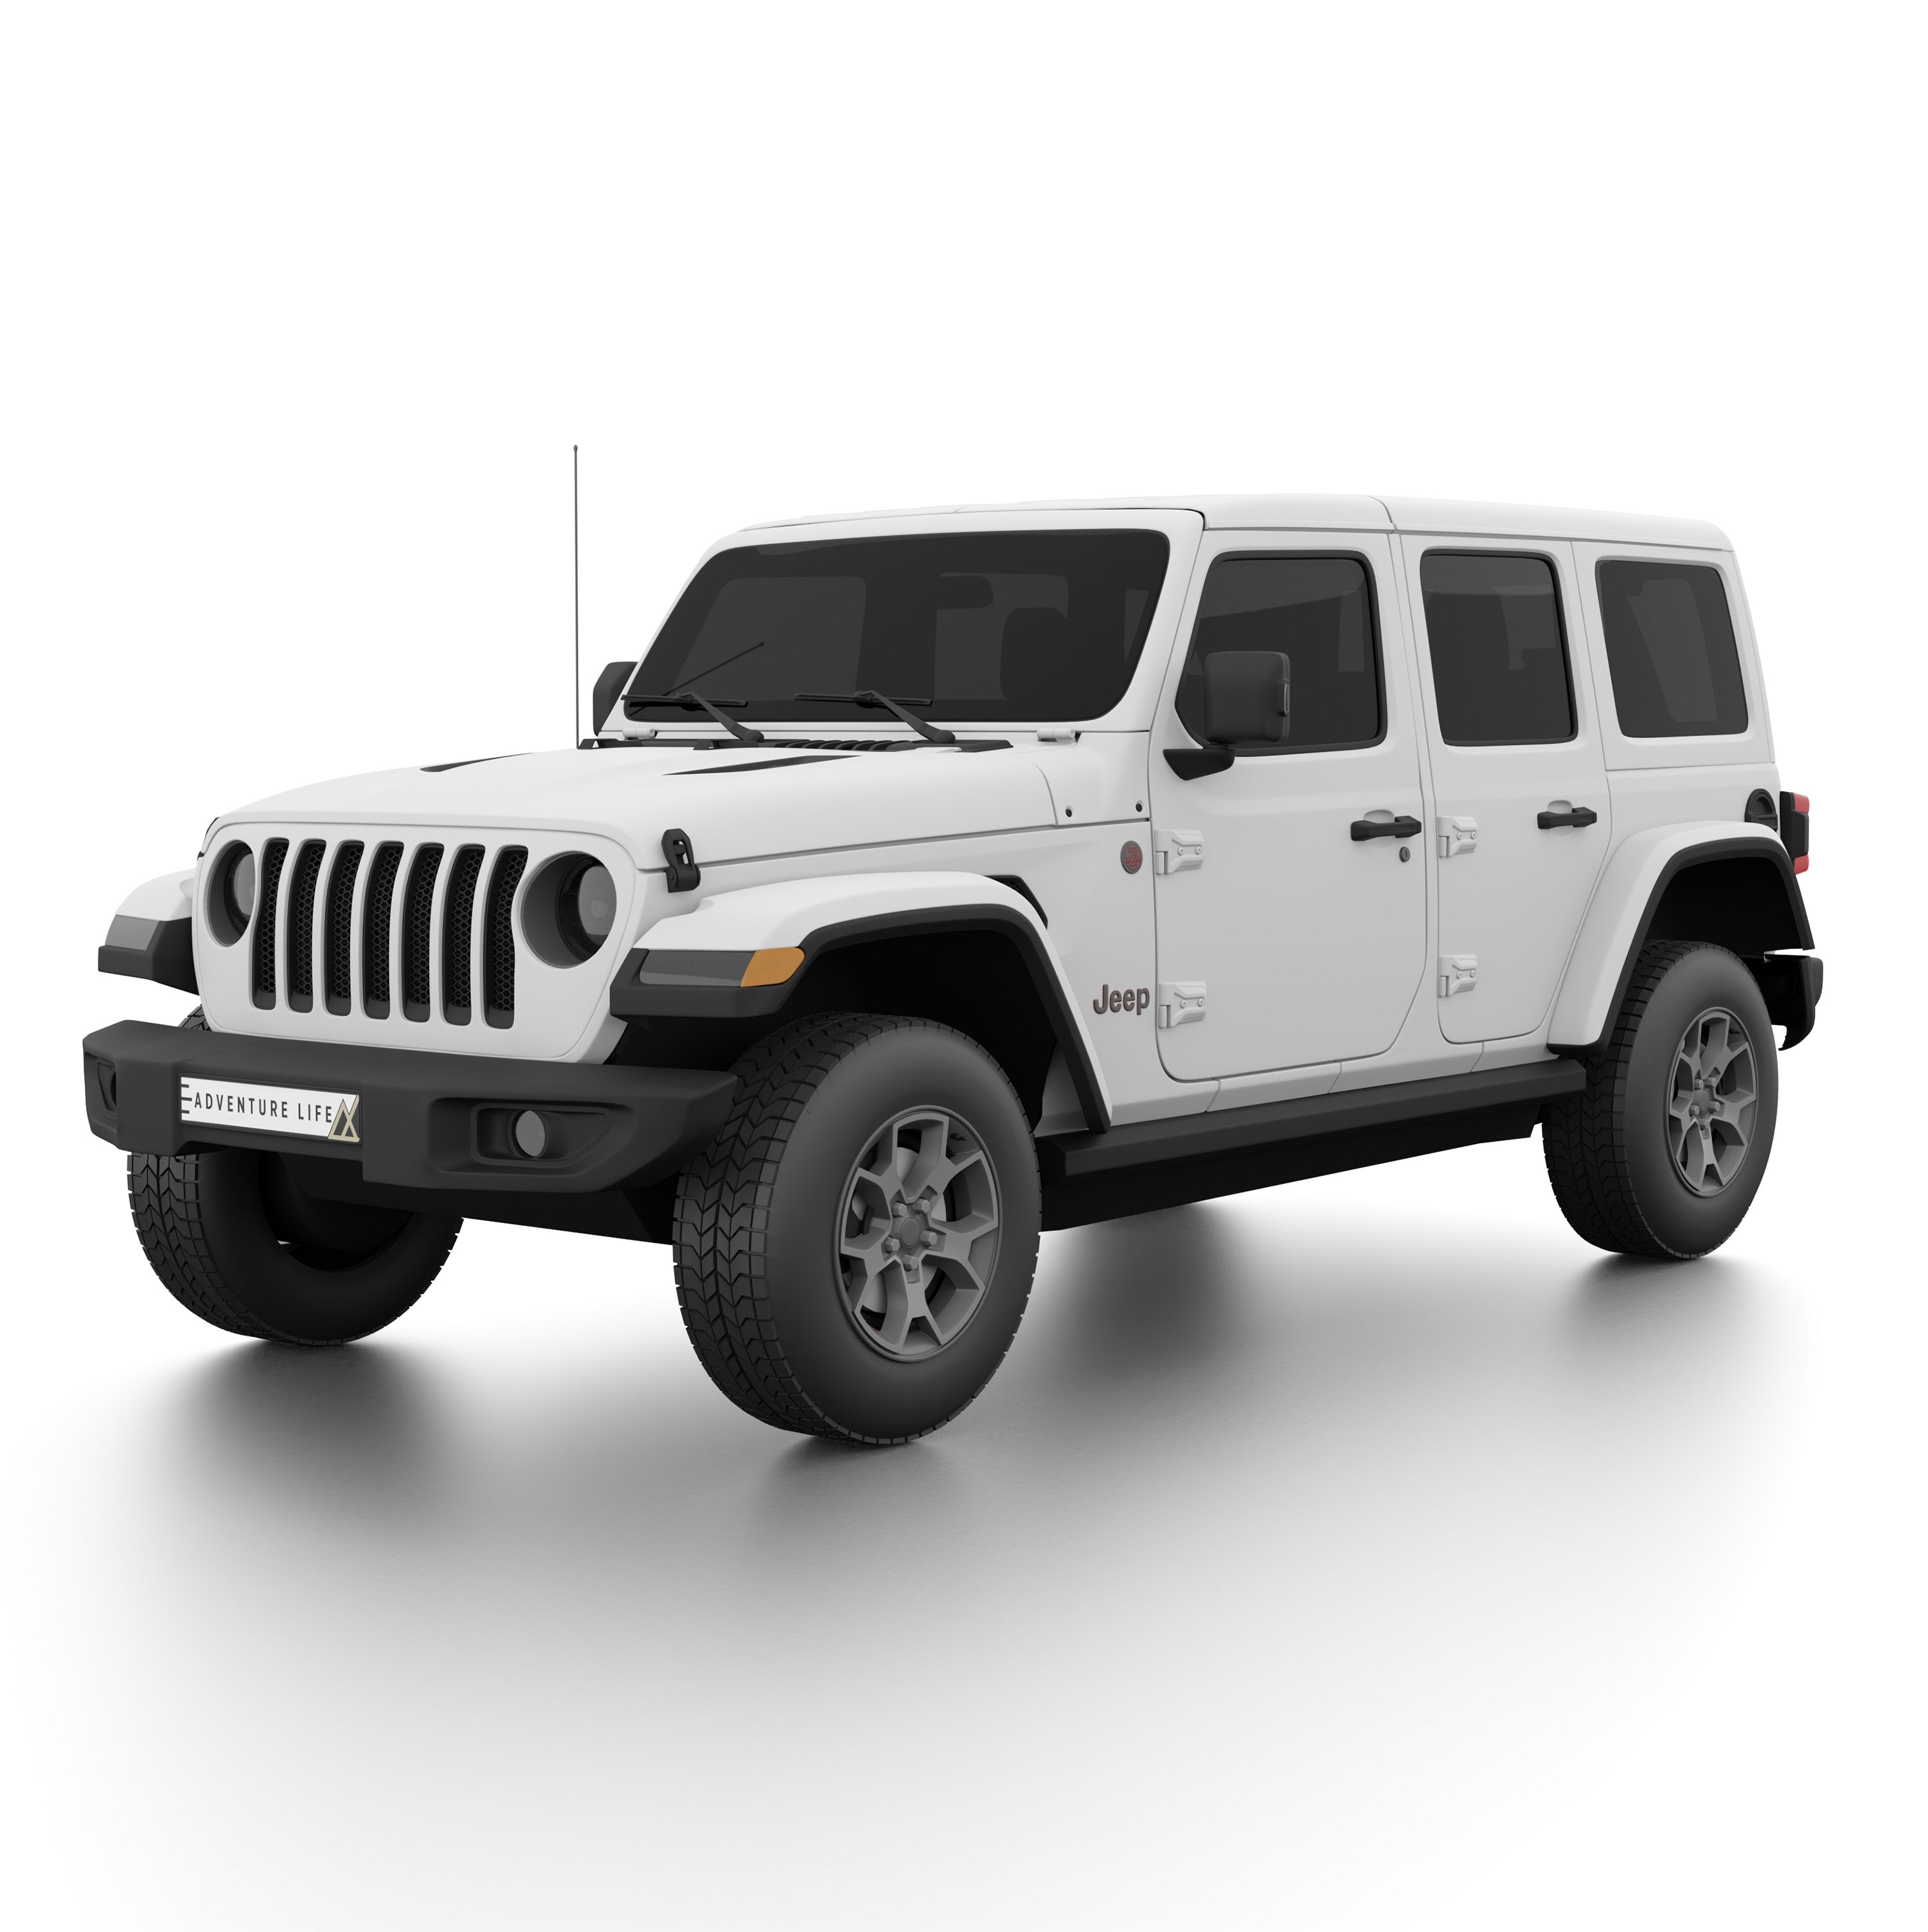 Jeep Wrangler JK Parts and Accessories - Jeeps Are Life